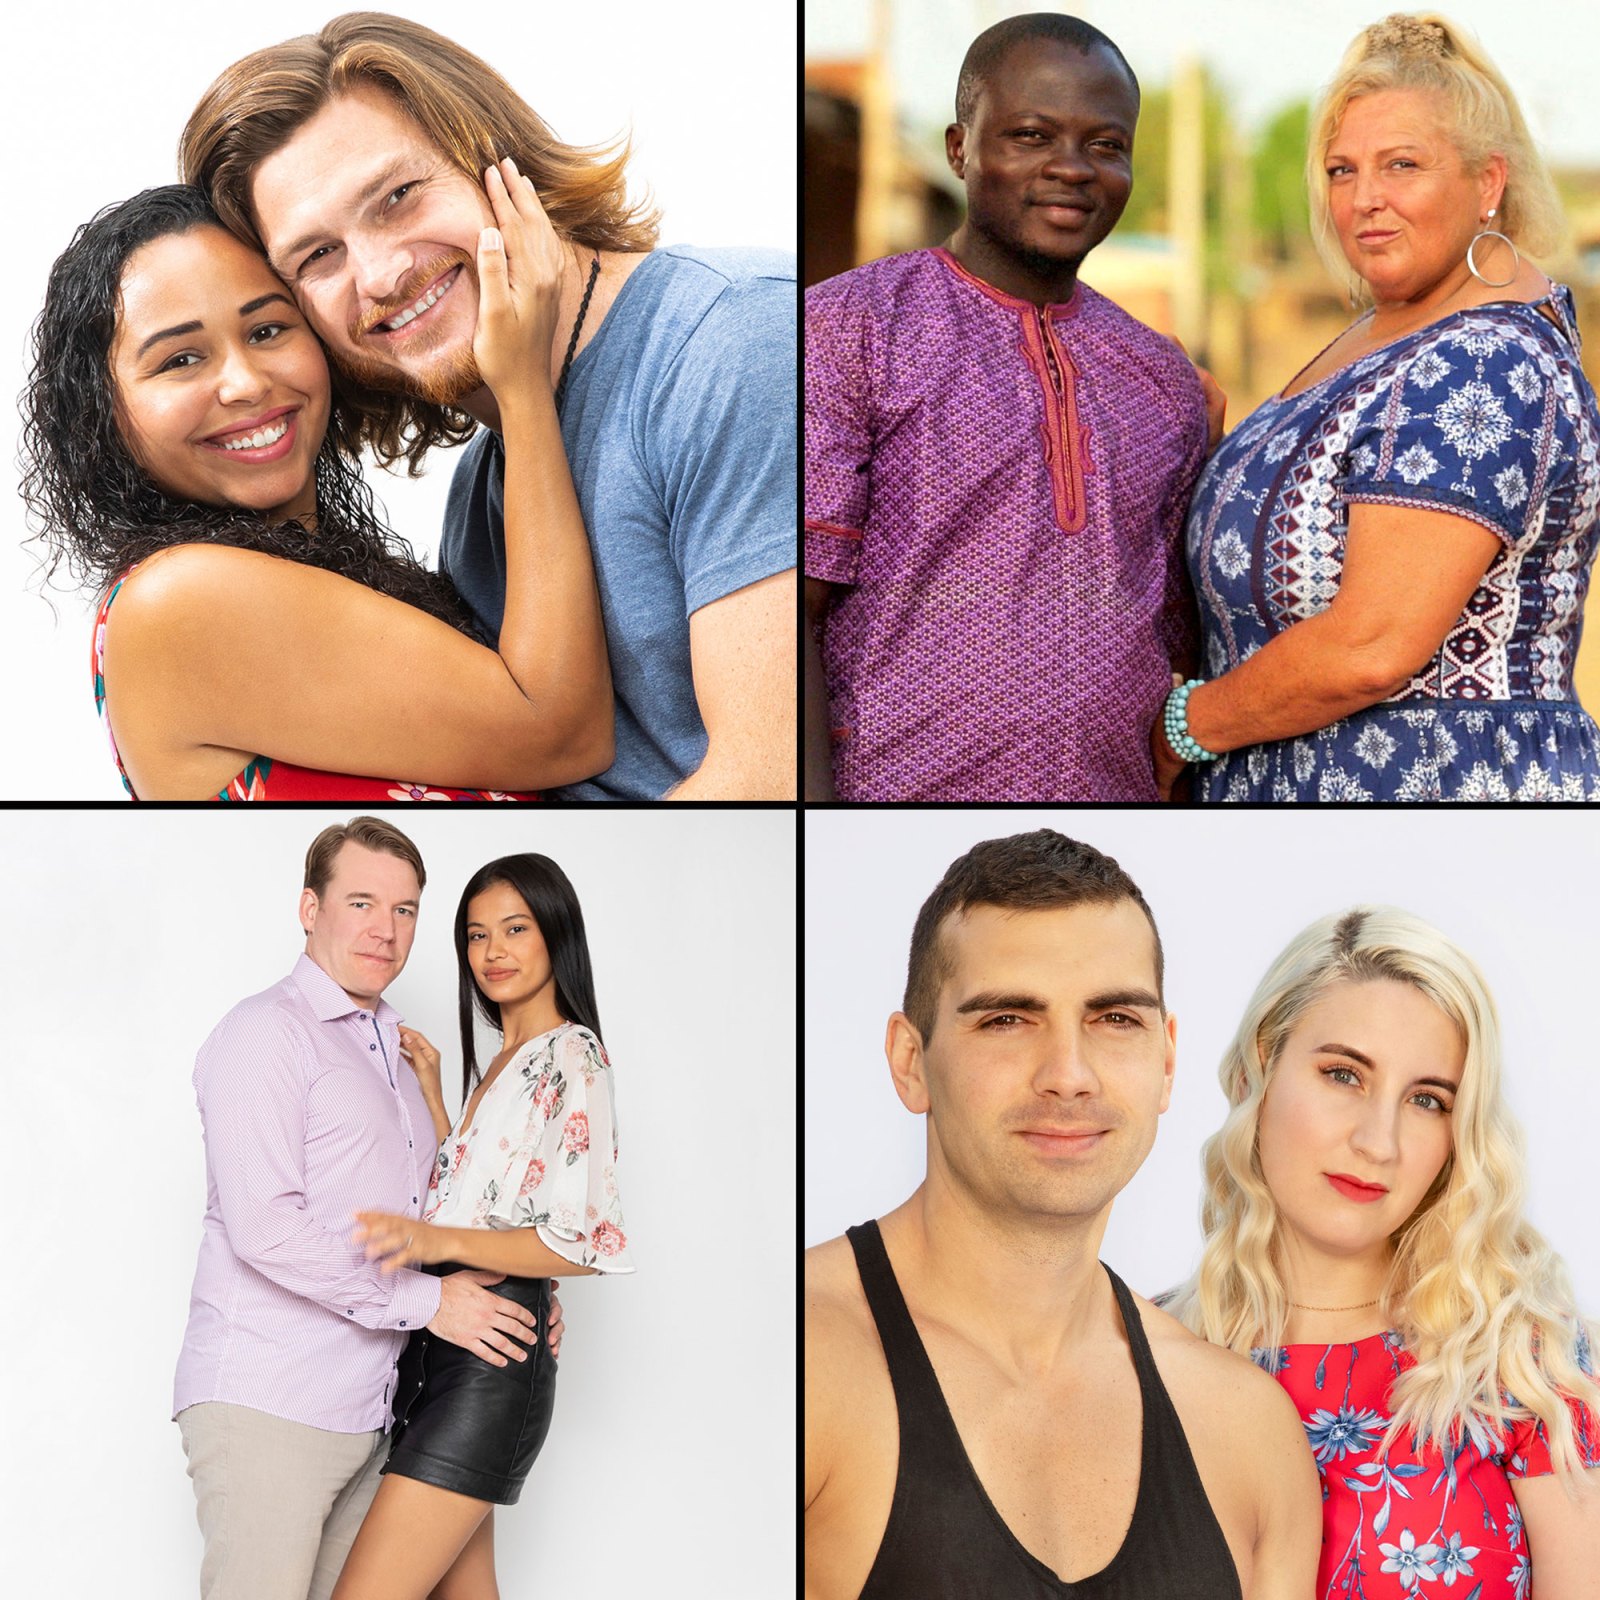 90 Day Fiance Season 7 Tell-All Which Couples Are Still Together